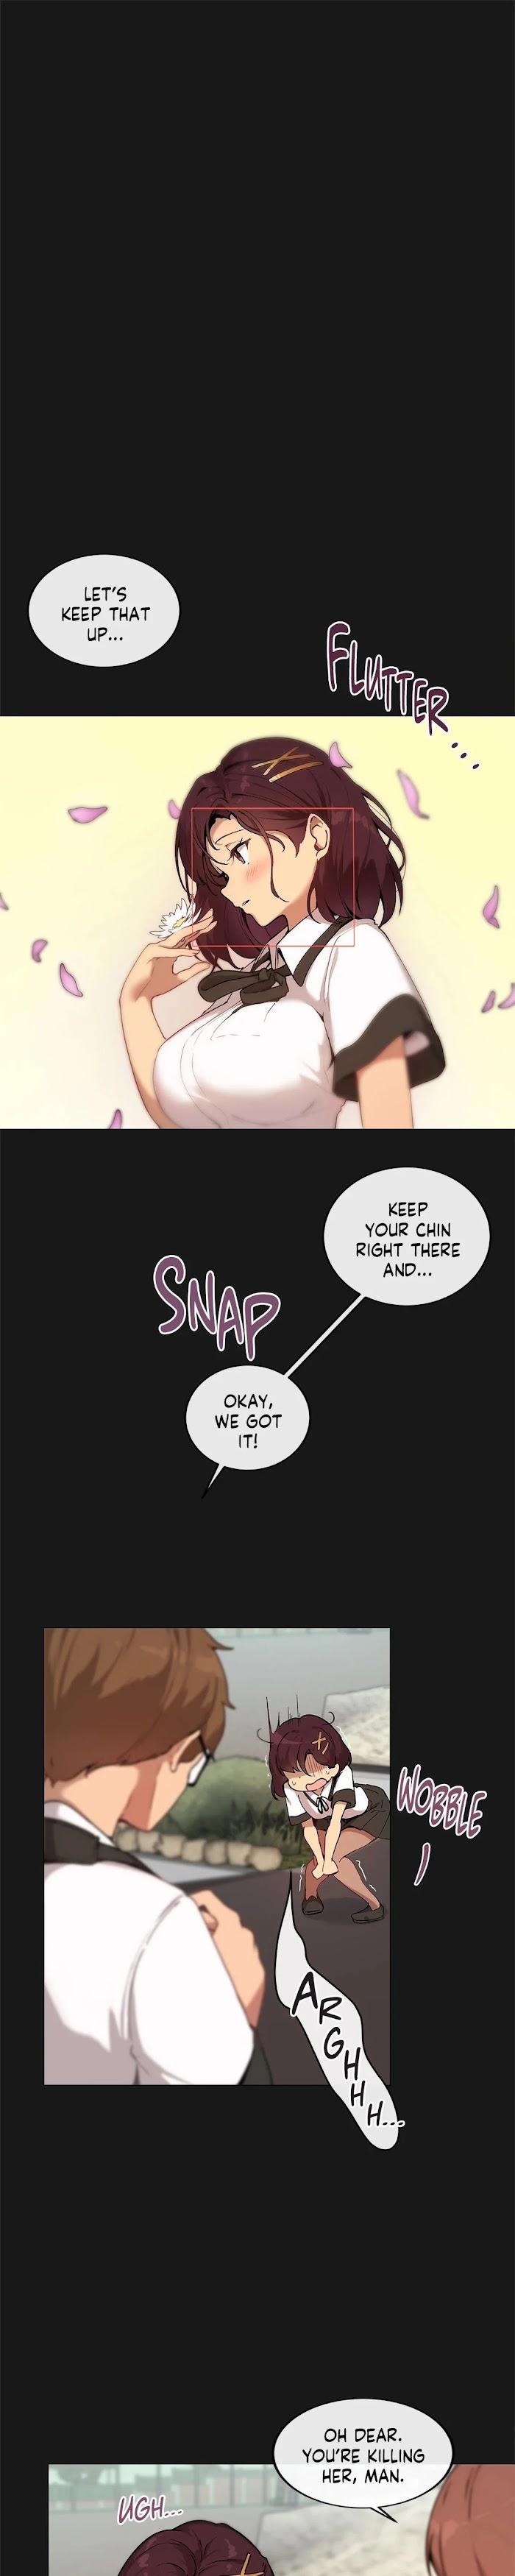 [Dumangoon, 130F] Sexcape Room: Wipe Out Ch.9/9 [English] [Manhwa PDF] Completed 96